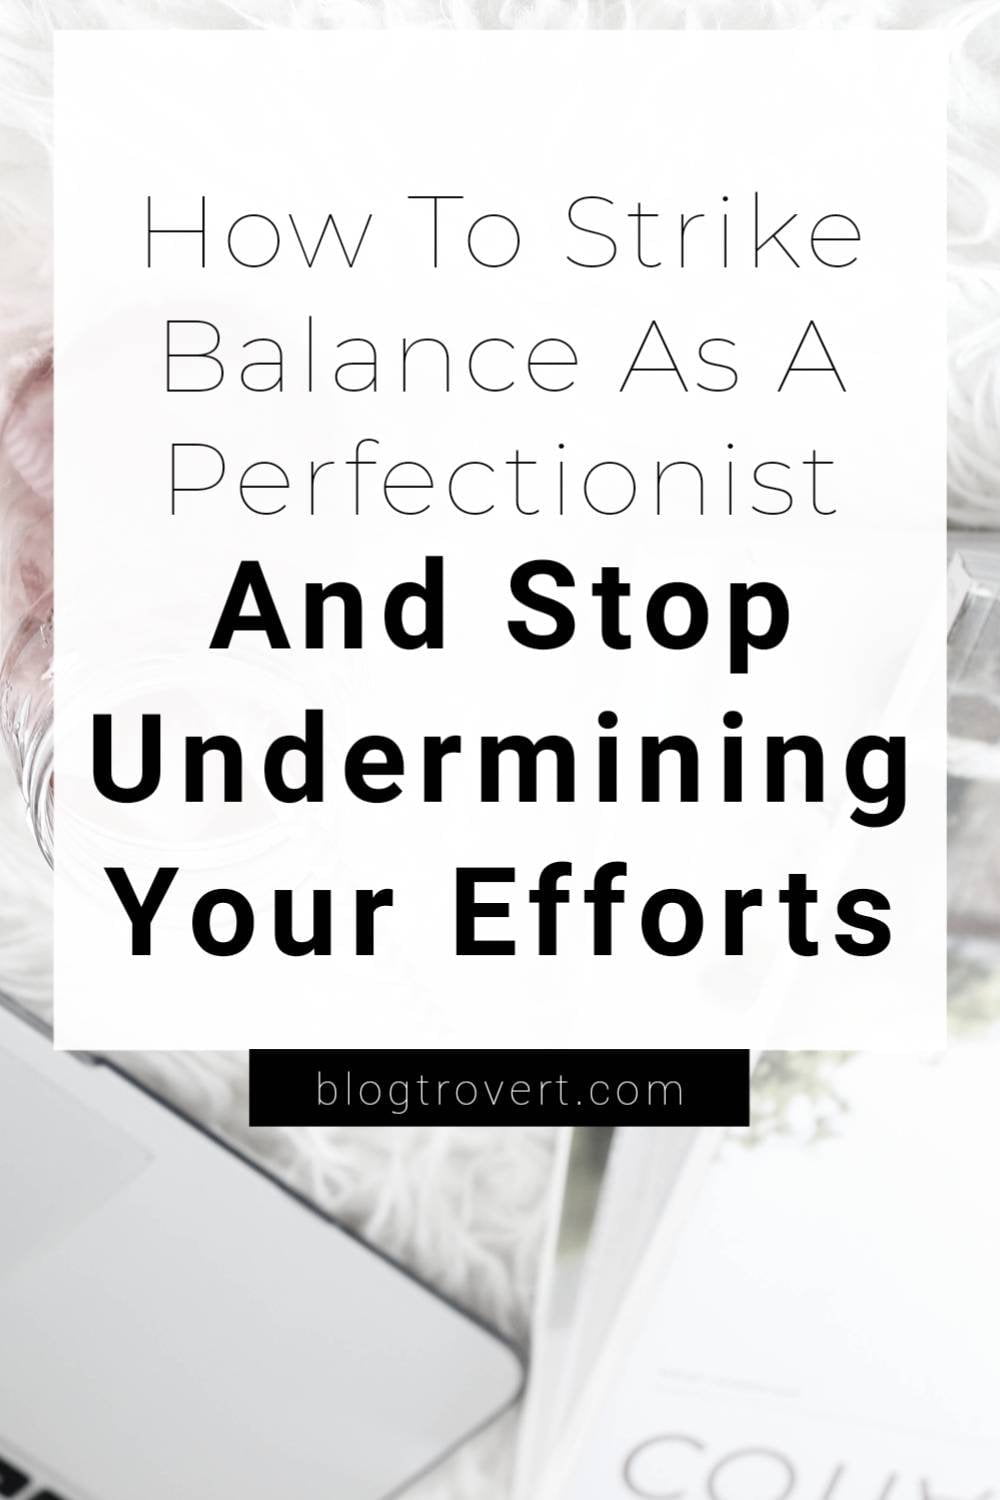 Perfectionism: How To Strike Balance As A Perfectionist 7